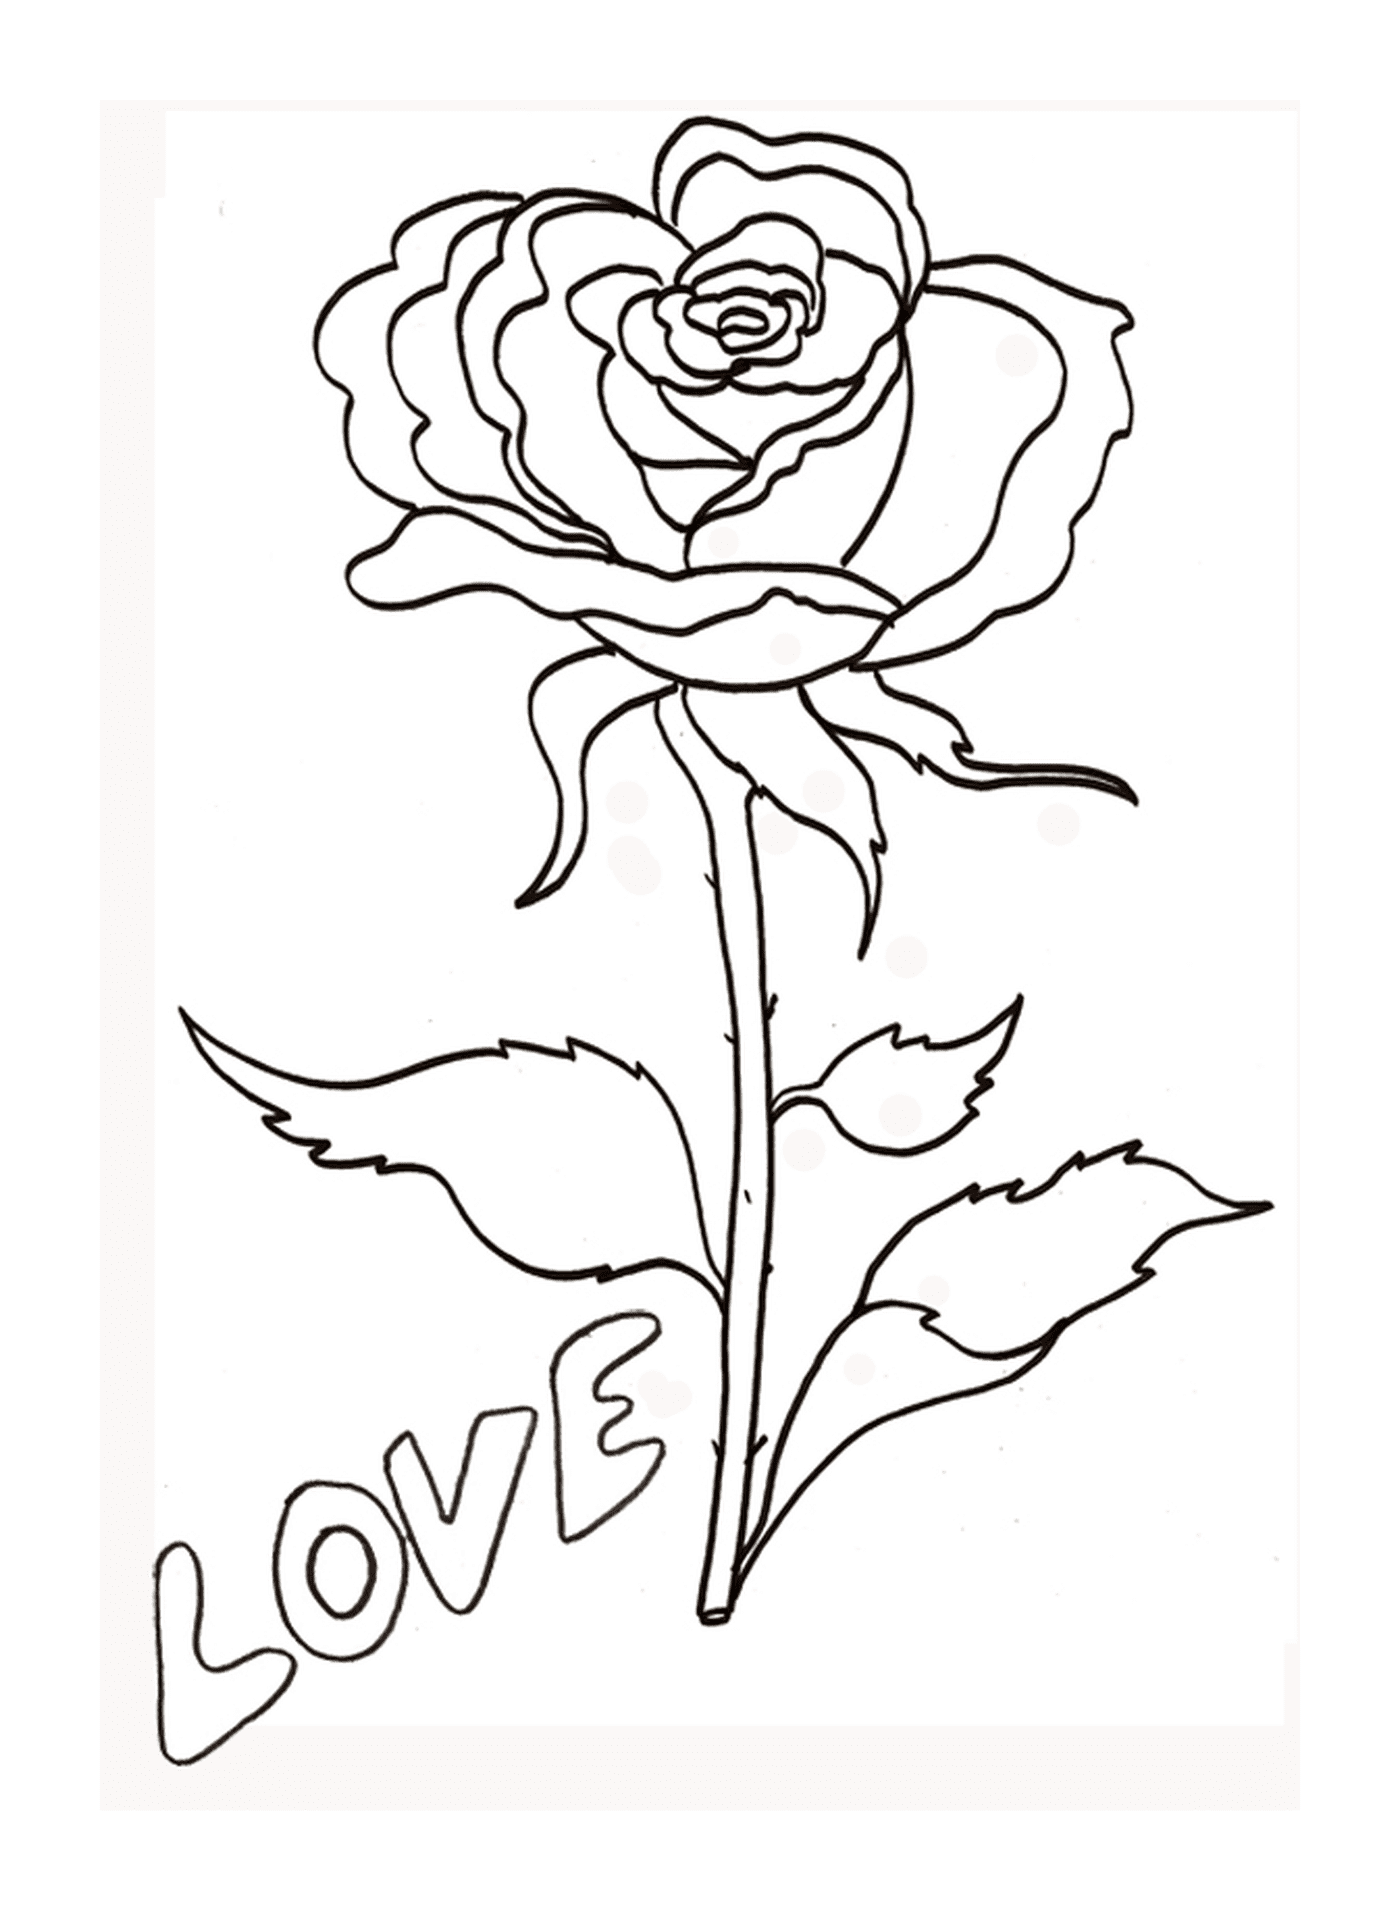  Rose with Love inscribed 